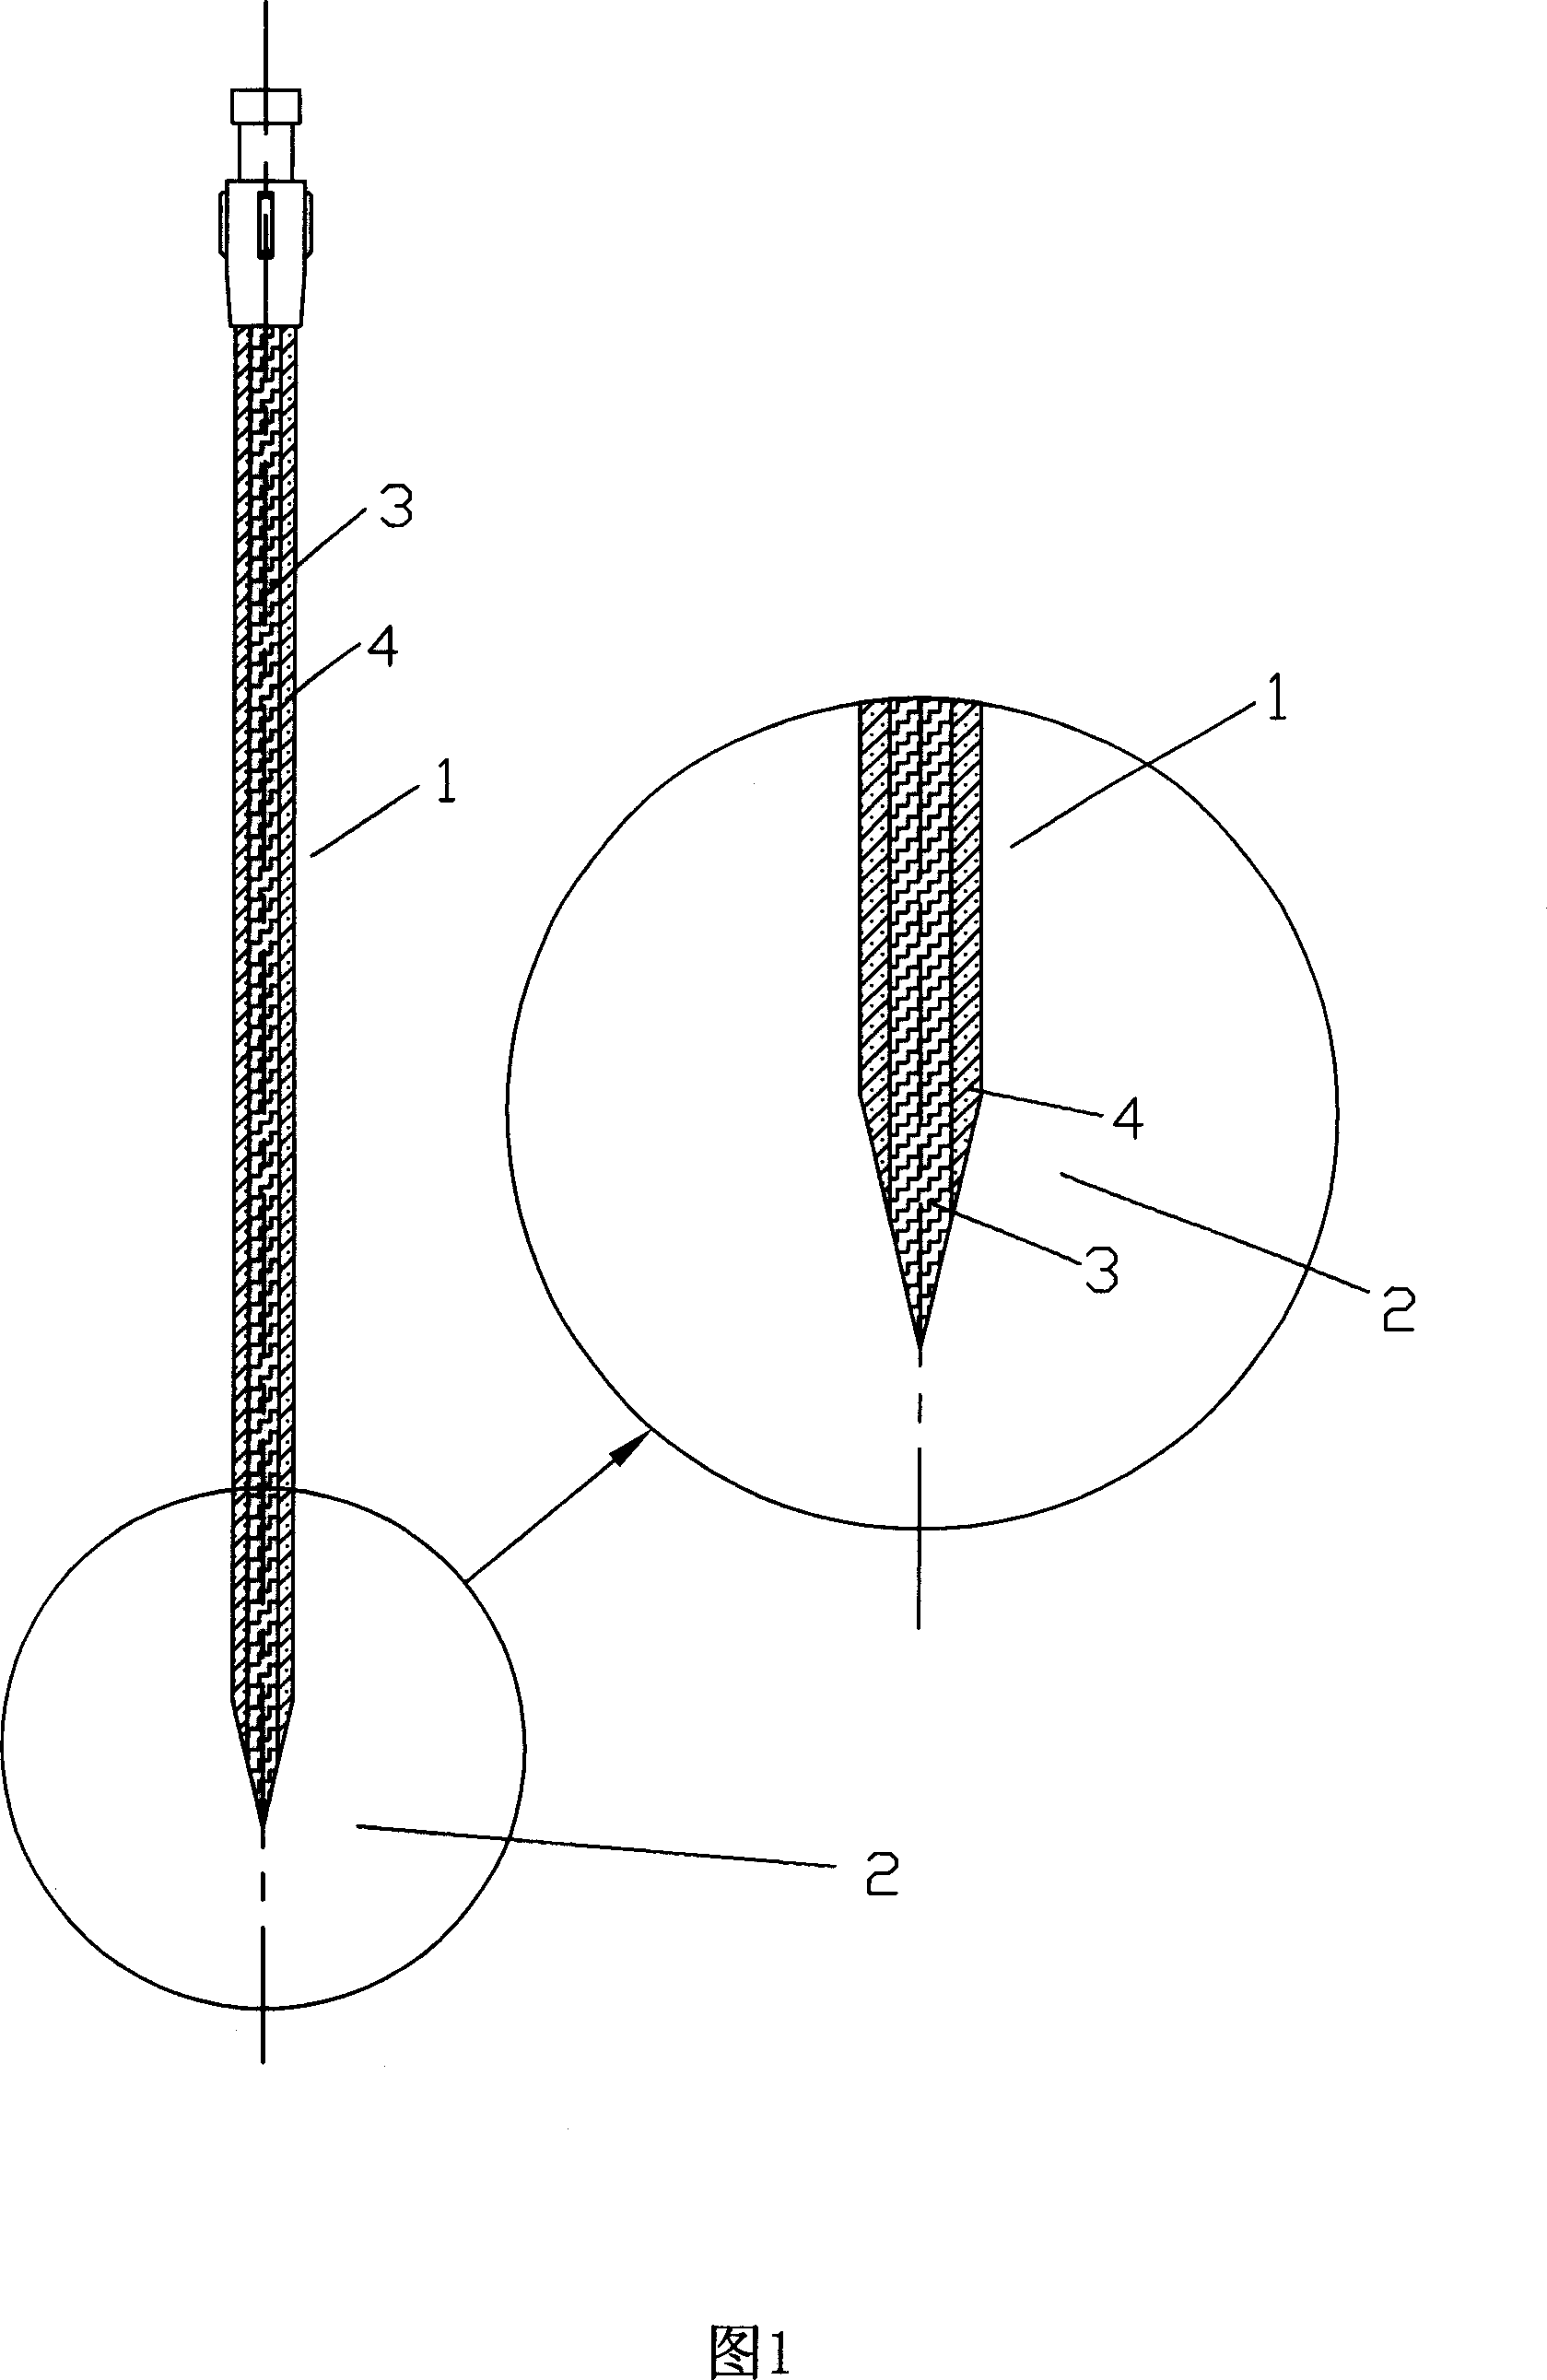 Two-step flexible top end dilater and the method for preparing the same